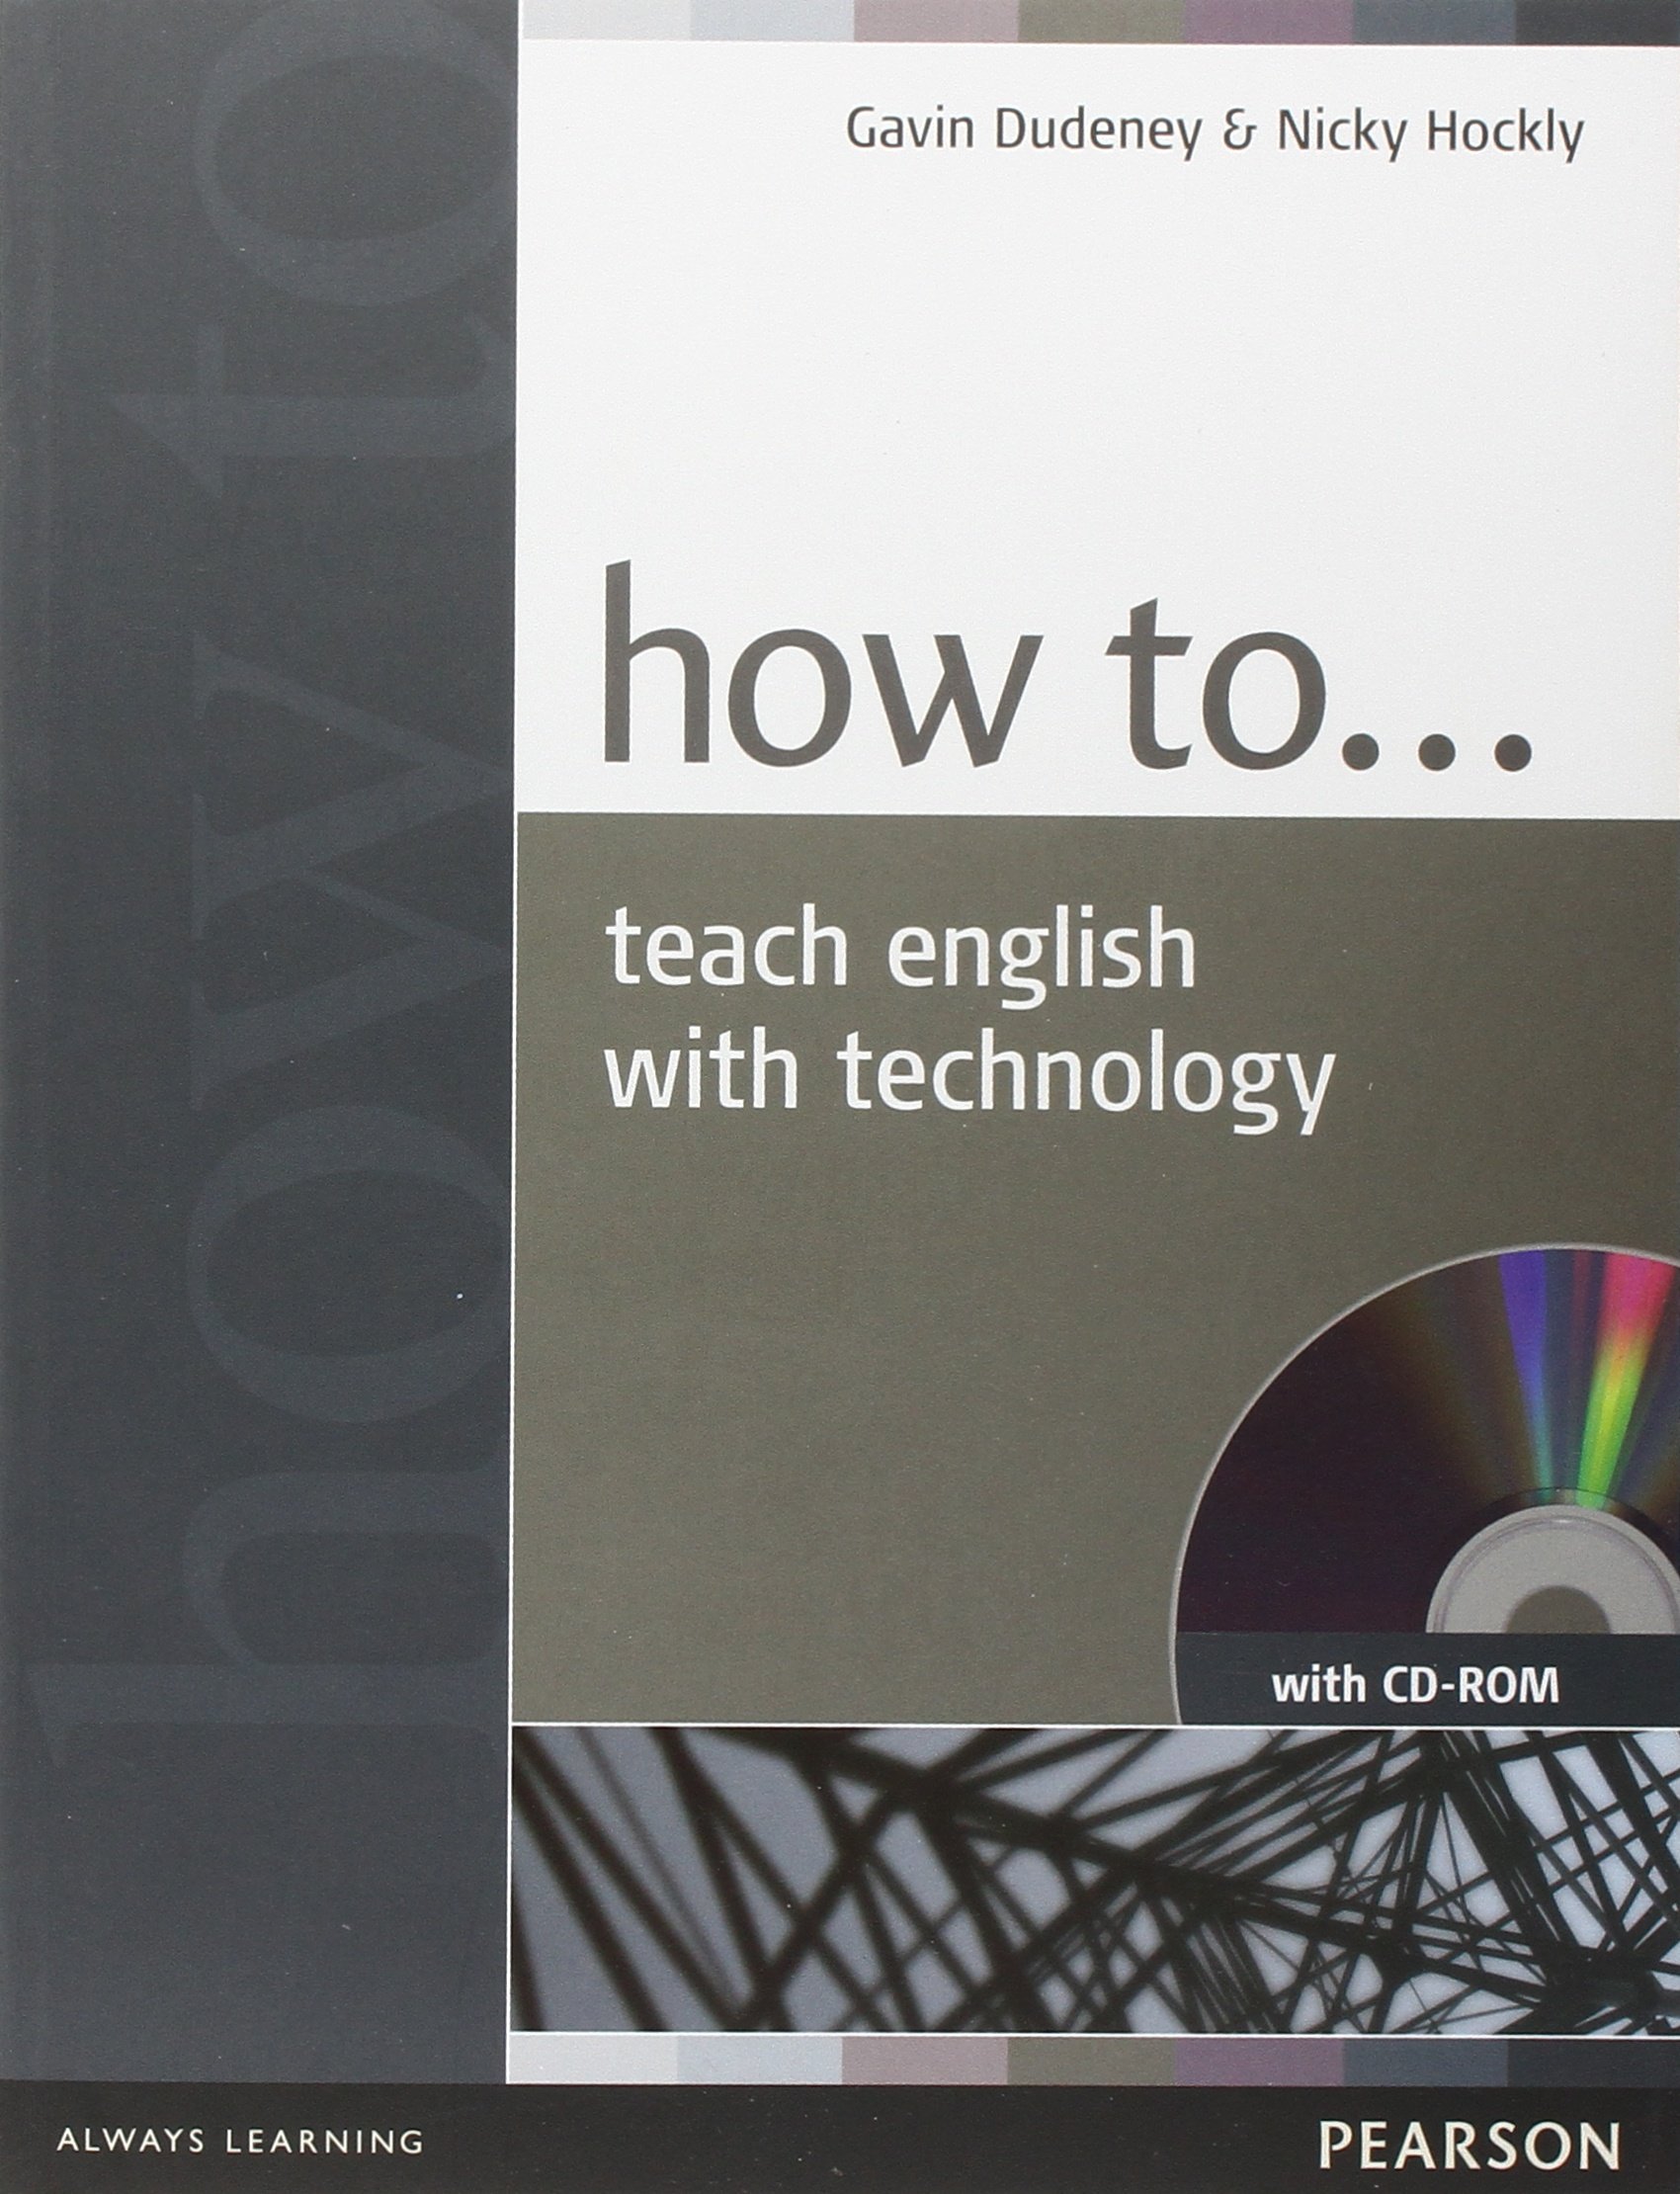 HOW TO TEACH ENGLISH WITH TECHNOLOGY Book + CD-ROM